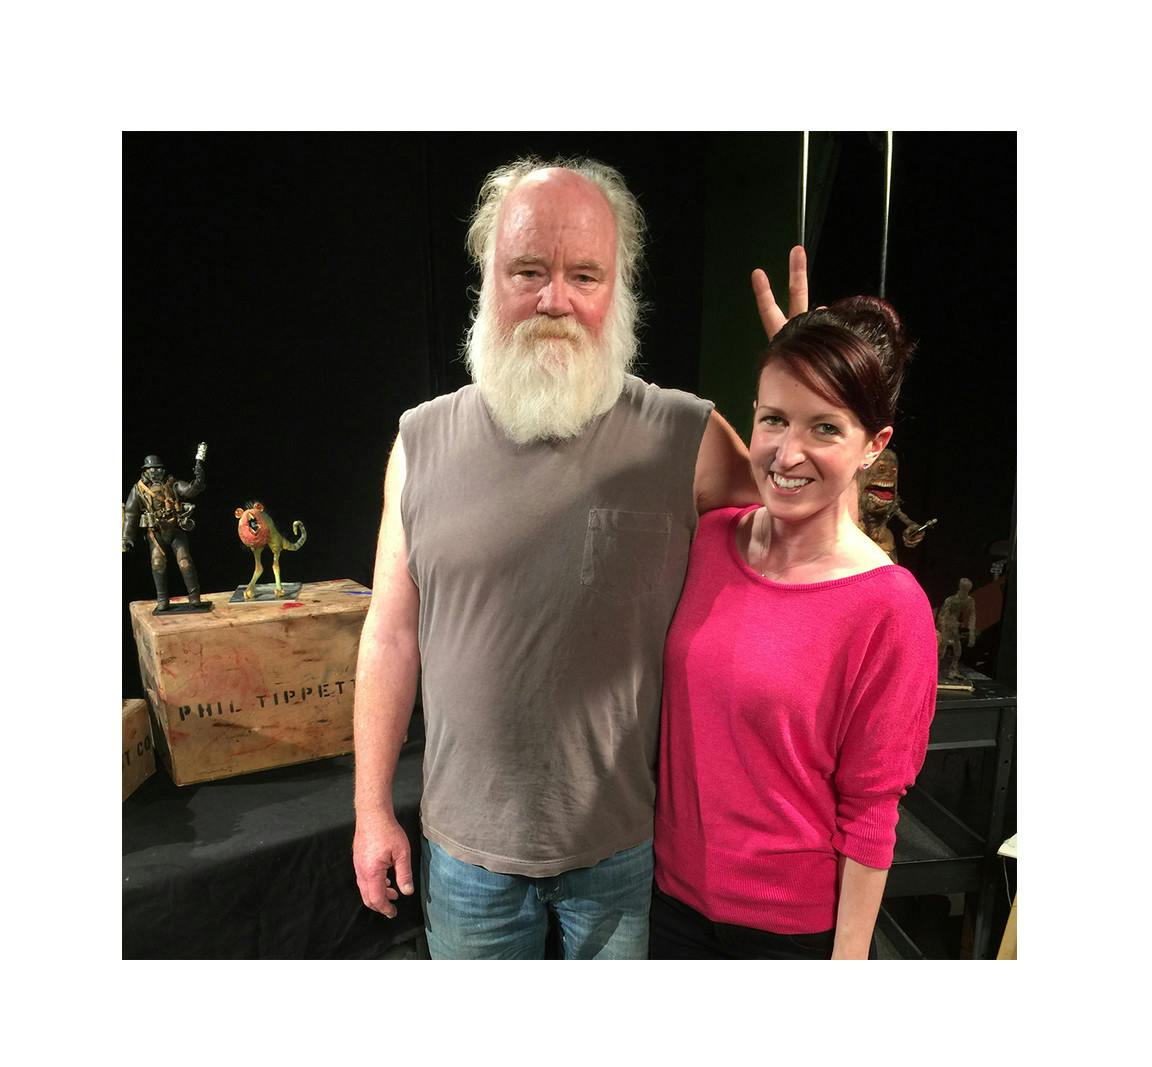 With Phil Tippett